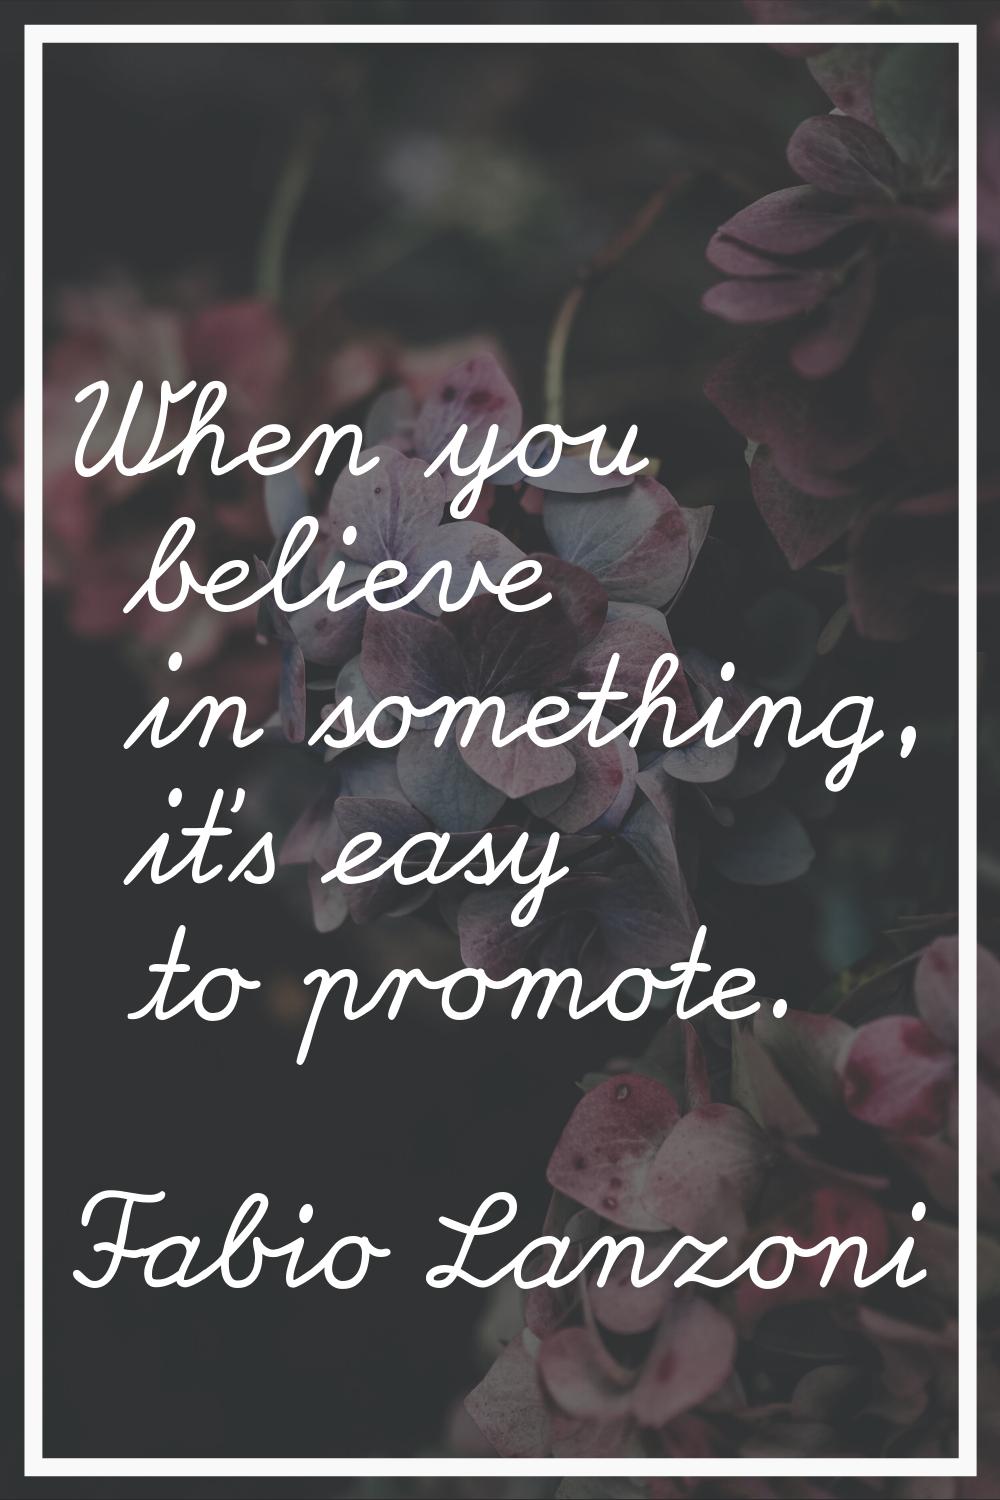 When you believe in something, it's easy to promote.